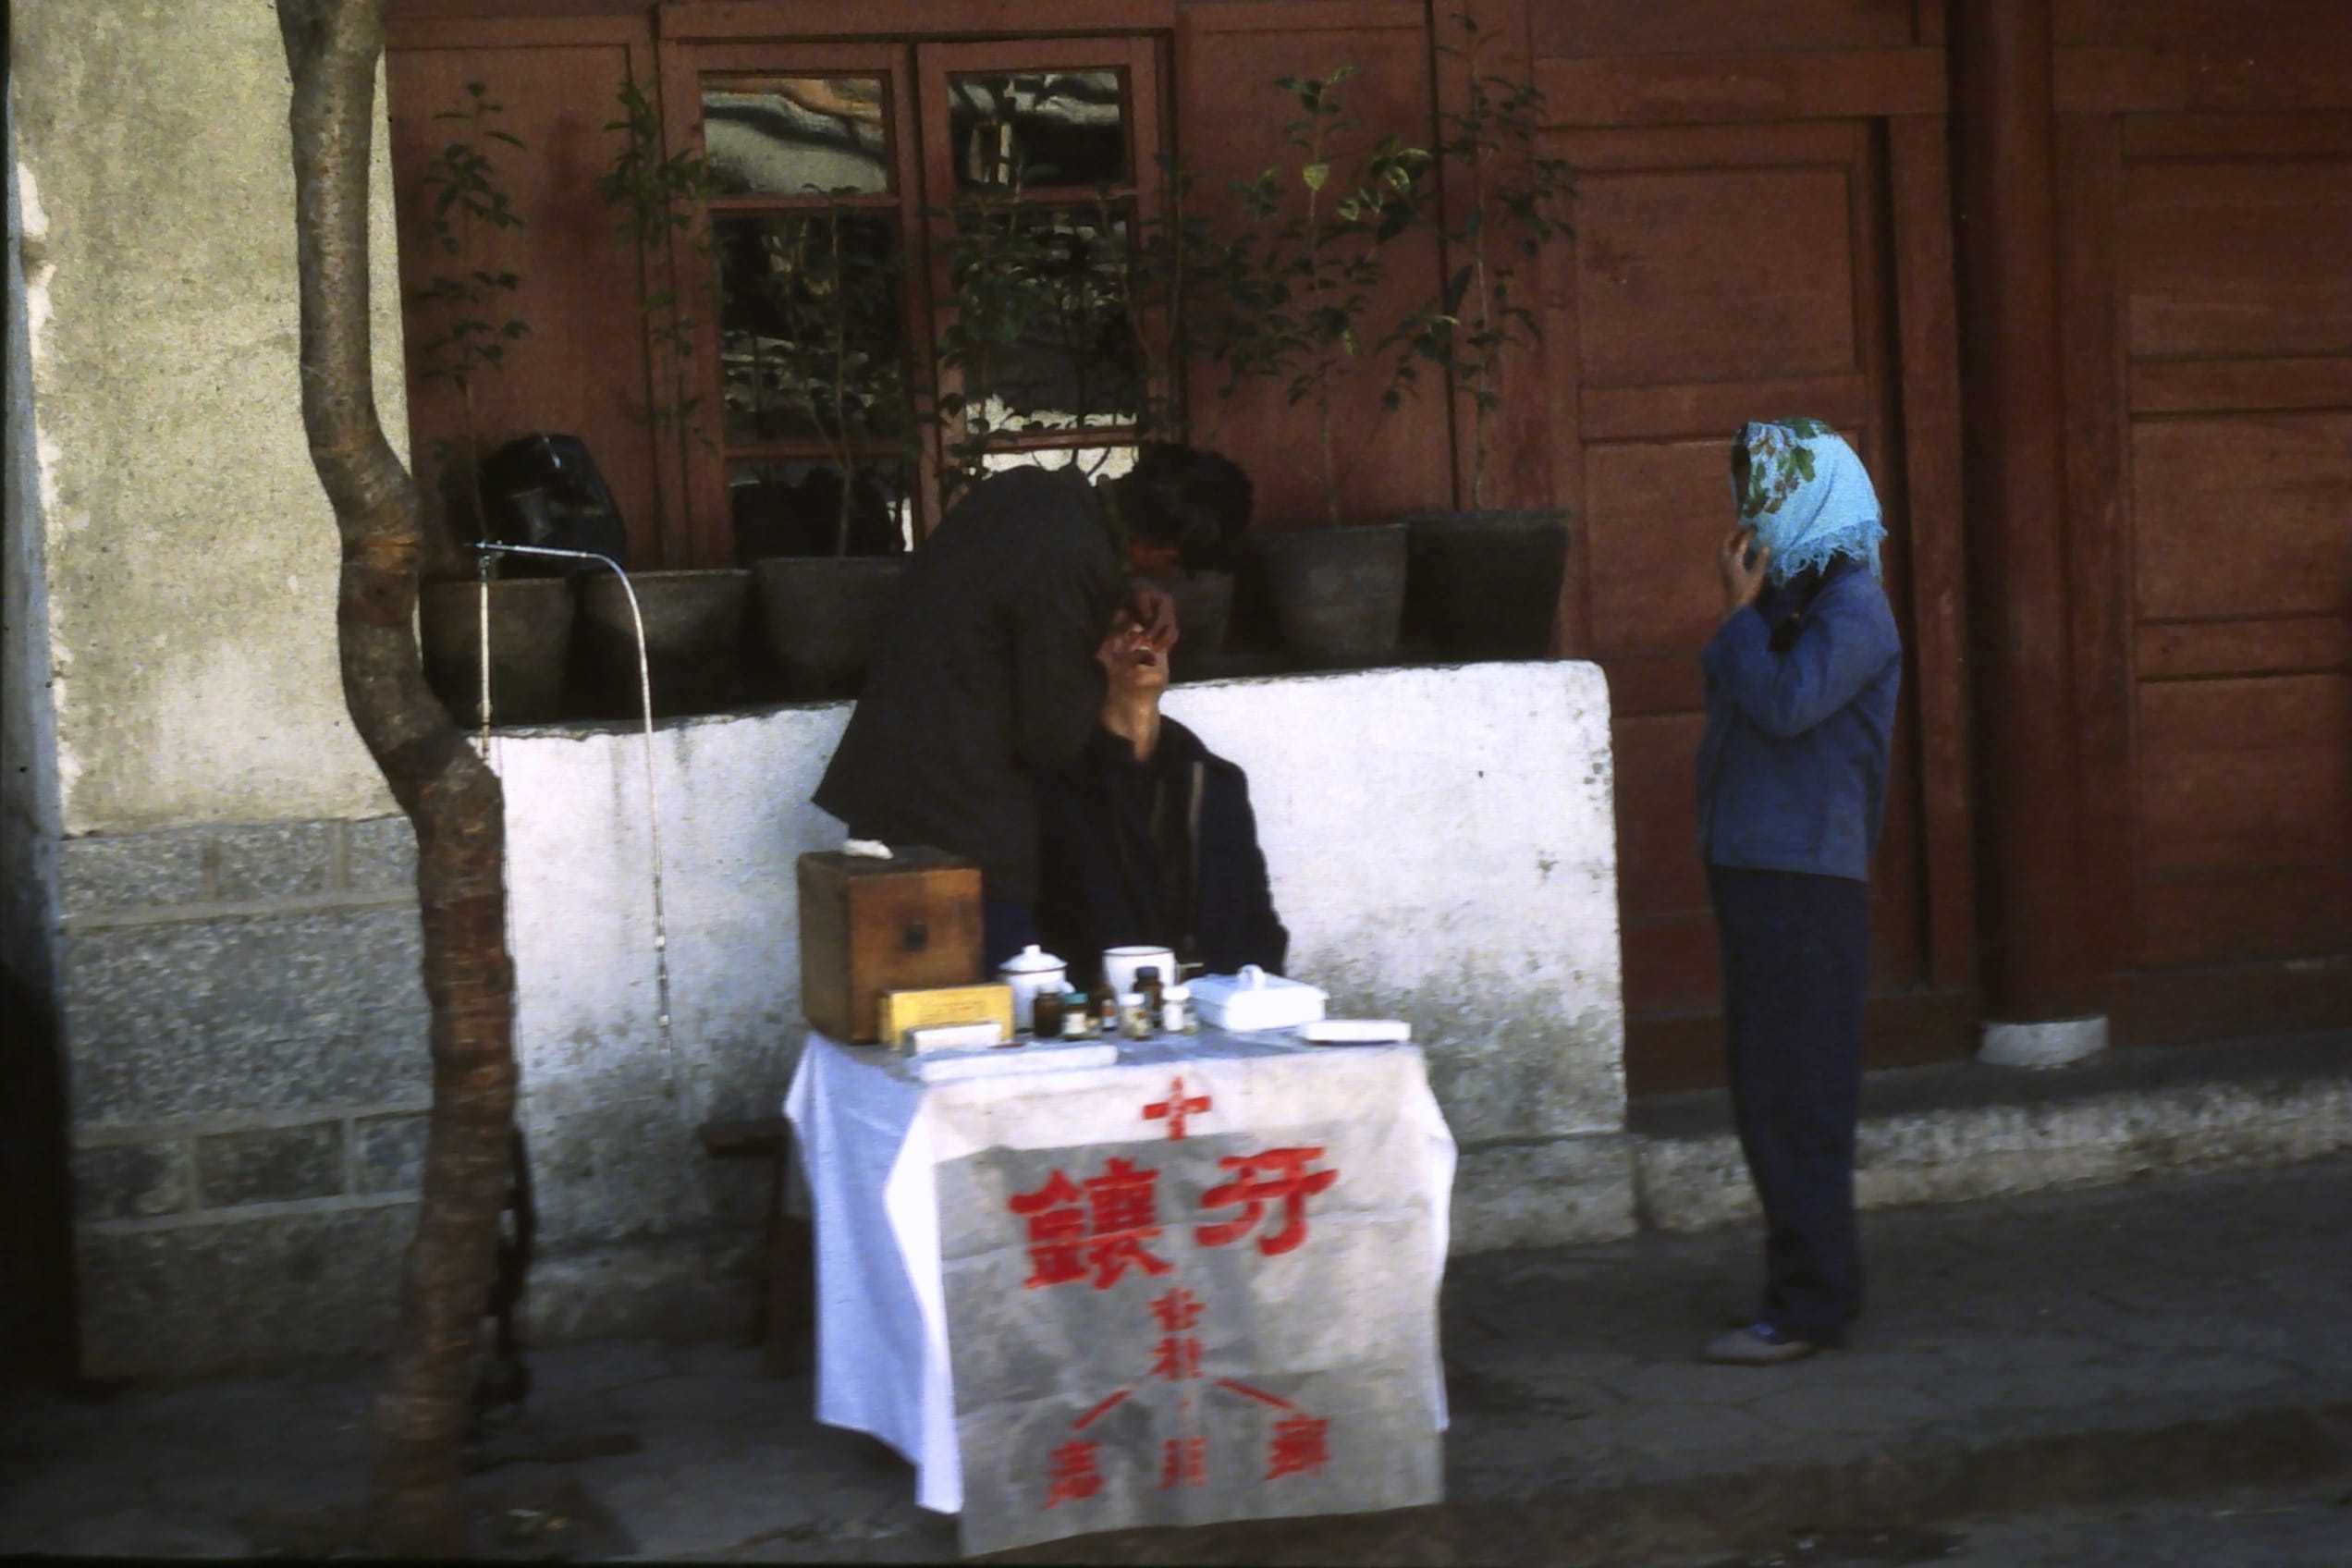 Kunming. Street dentist. Perhaps the woman with the scarf waiting for treatment has a tooth ache